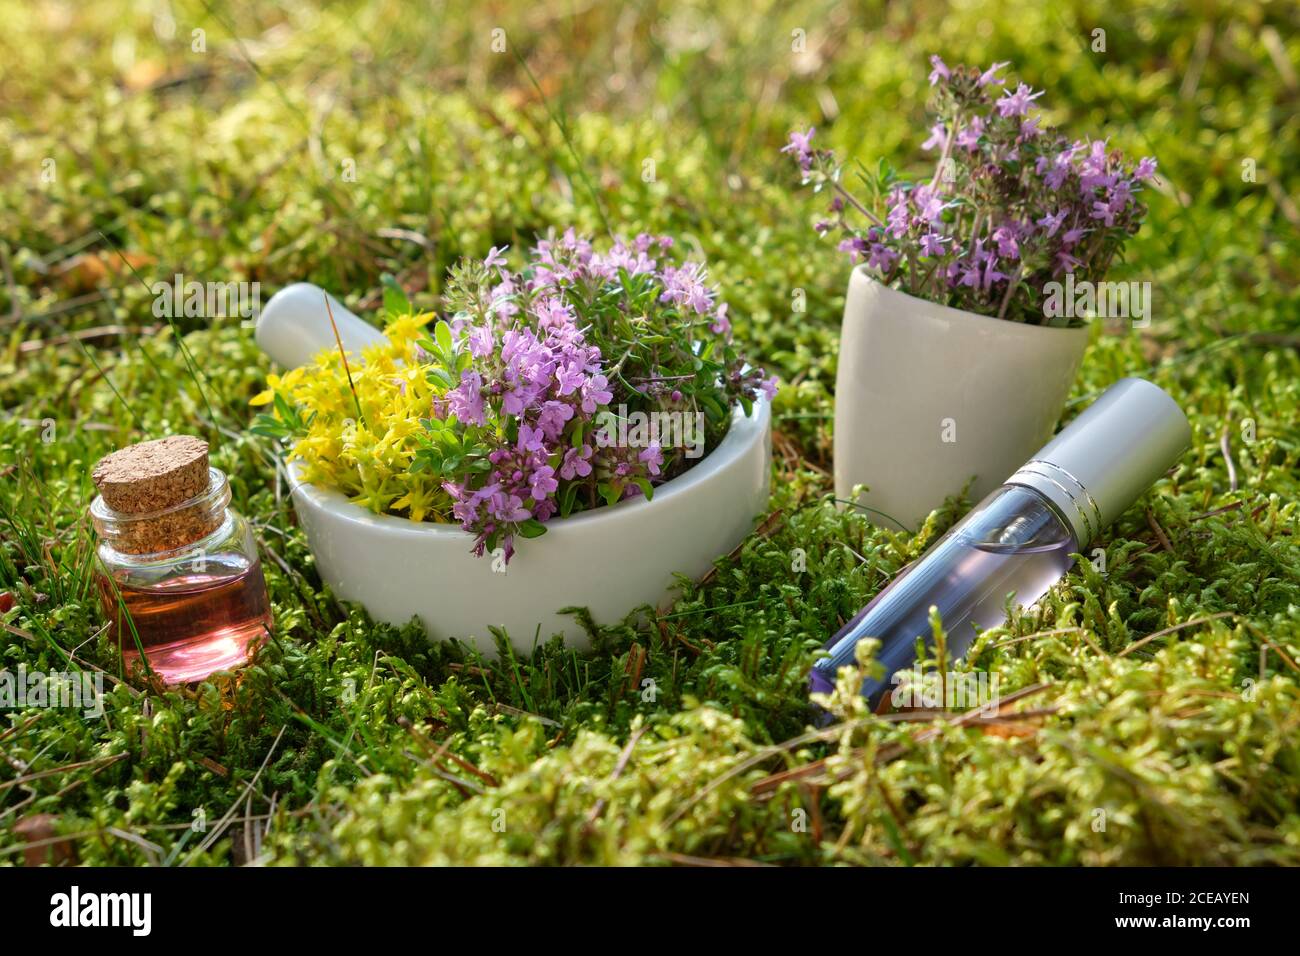 Mortar of thyme and medicinal herbs, essential oil bottles on a green moss in forest outdoors. Stock Photo